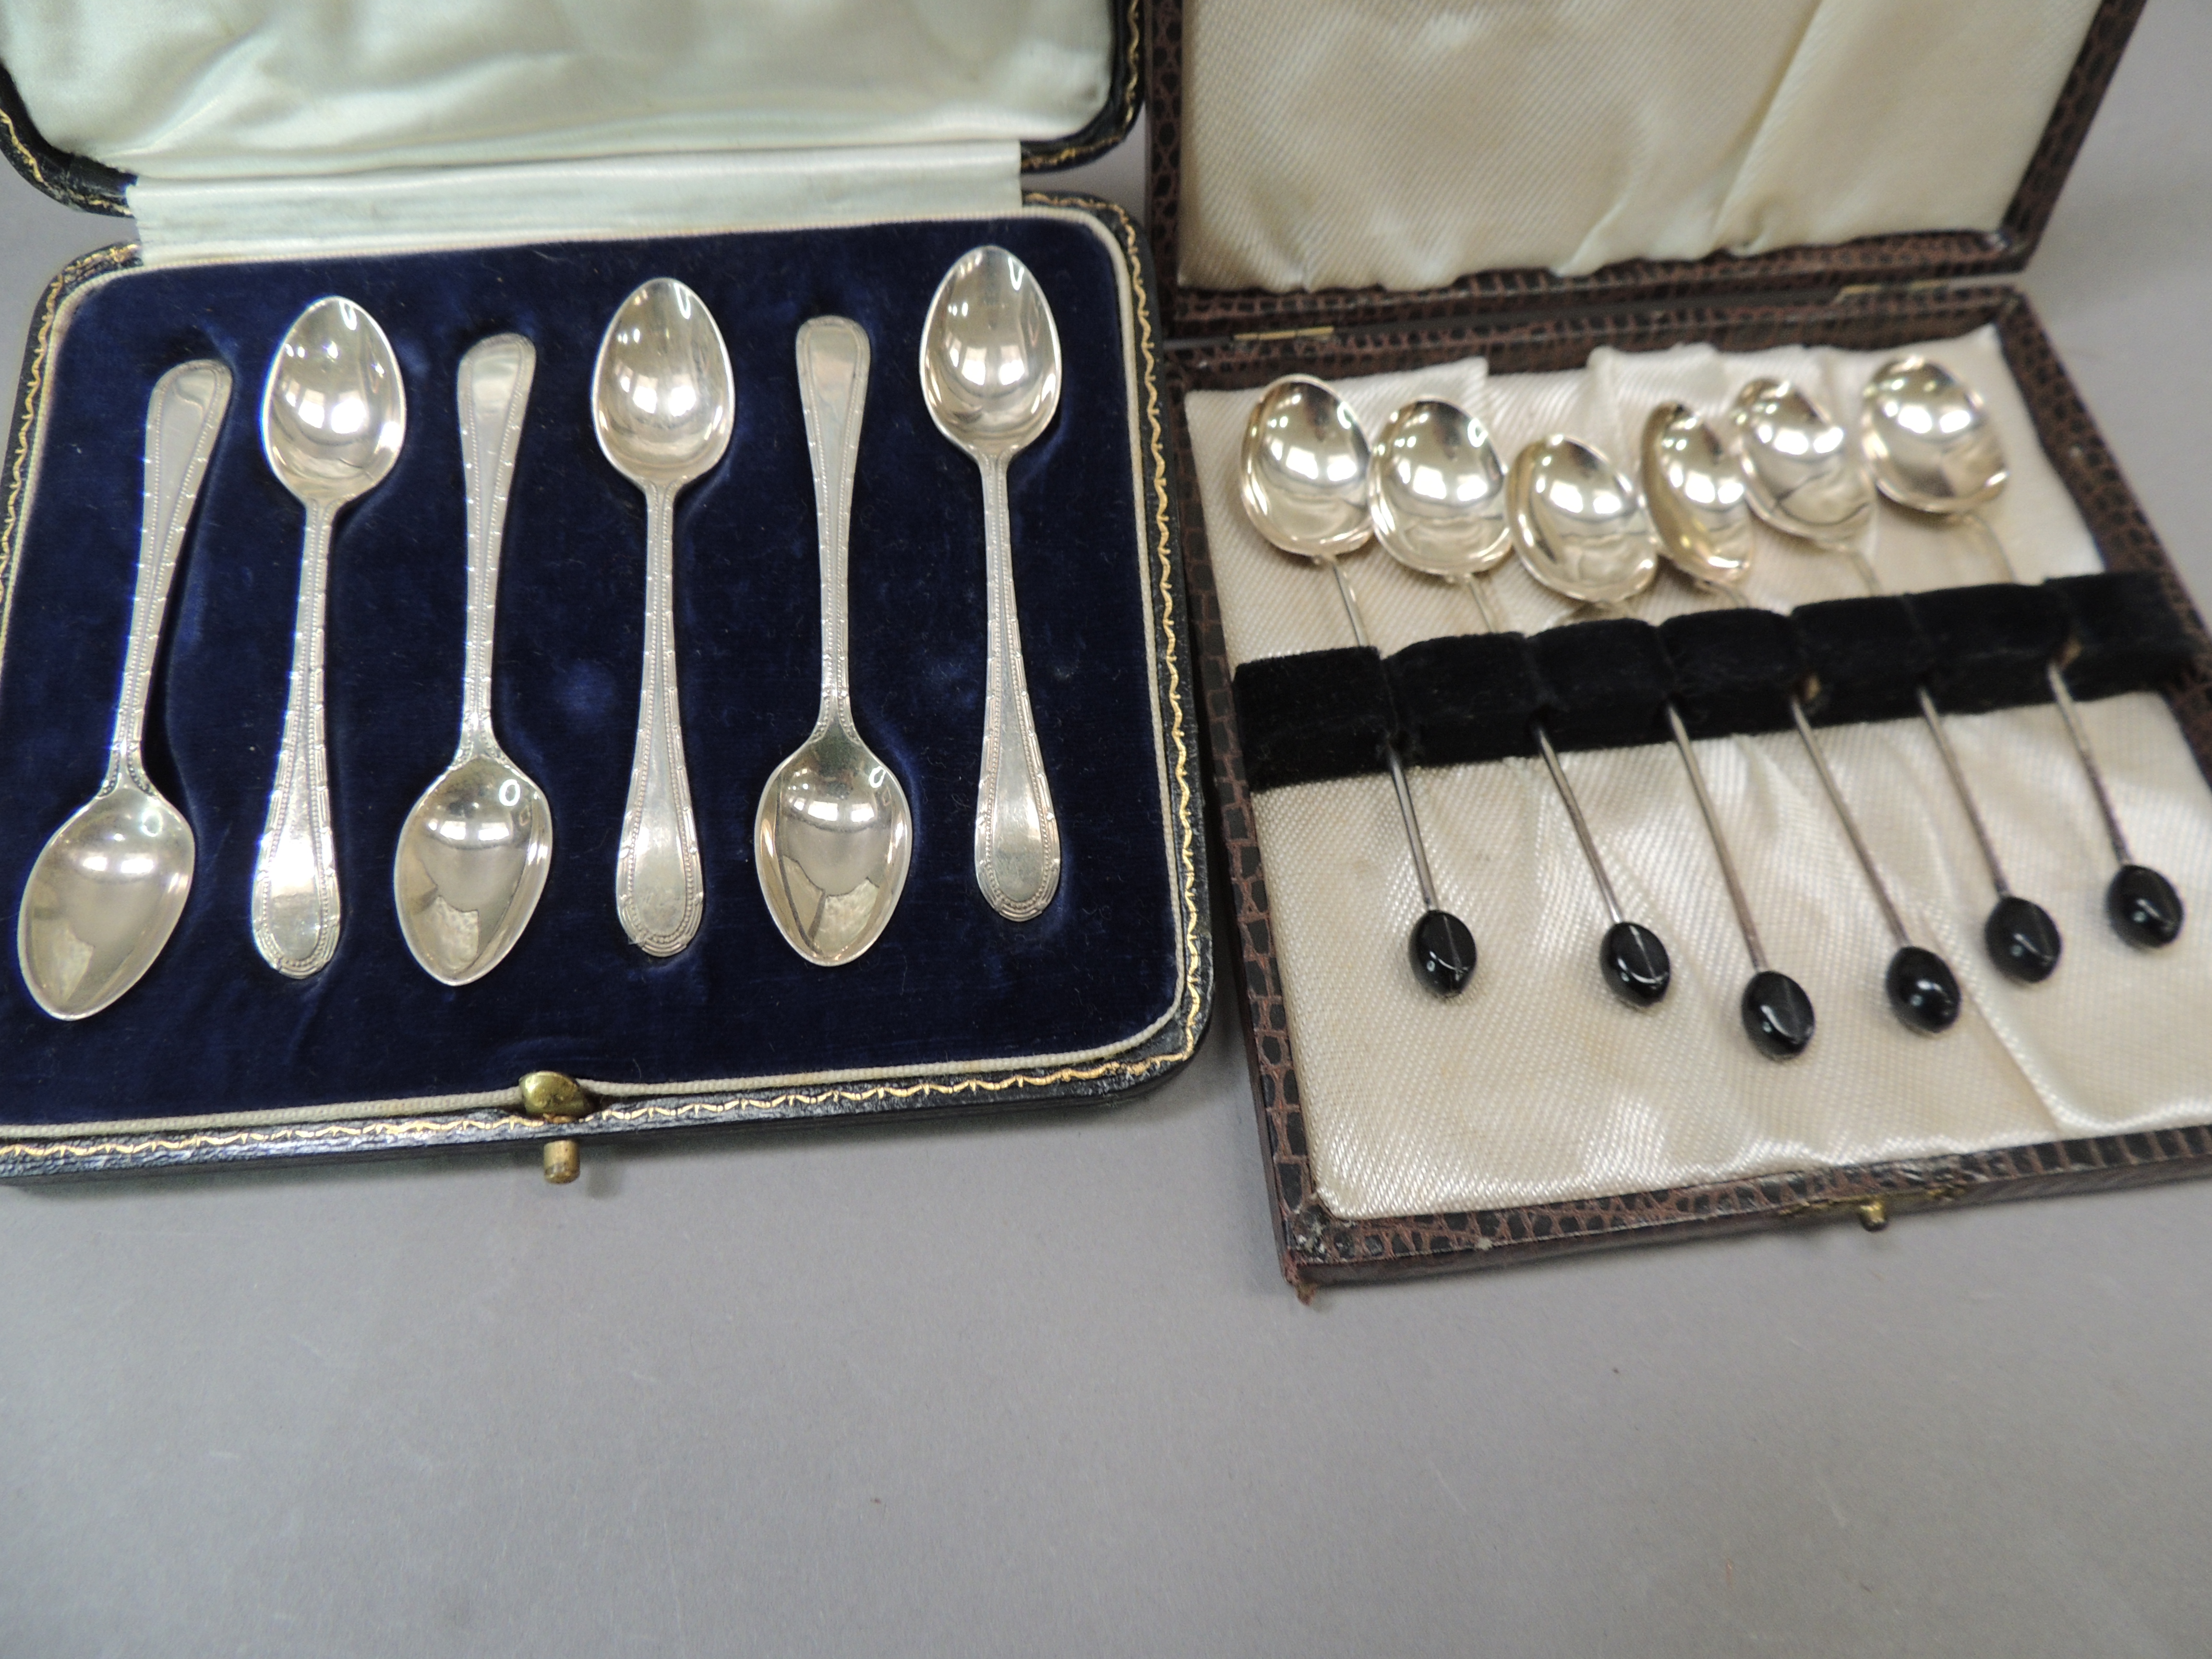 A cased set of silver tea spoons together with a set of silver coffee spoons with black coffee